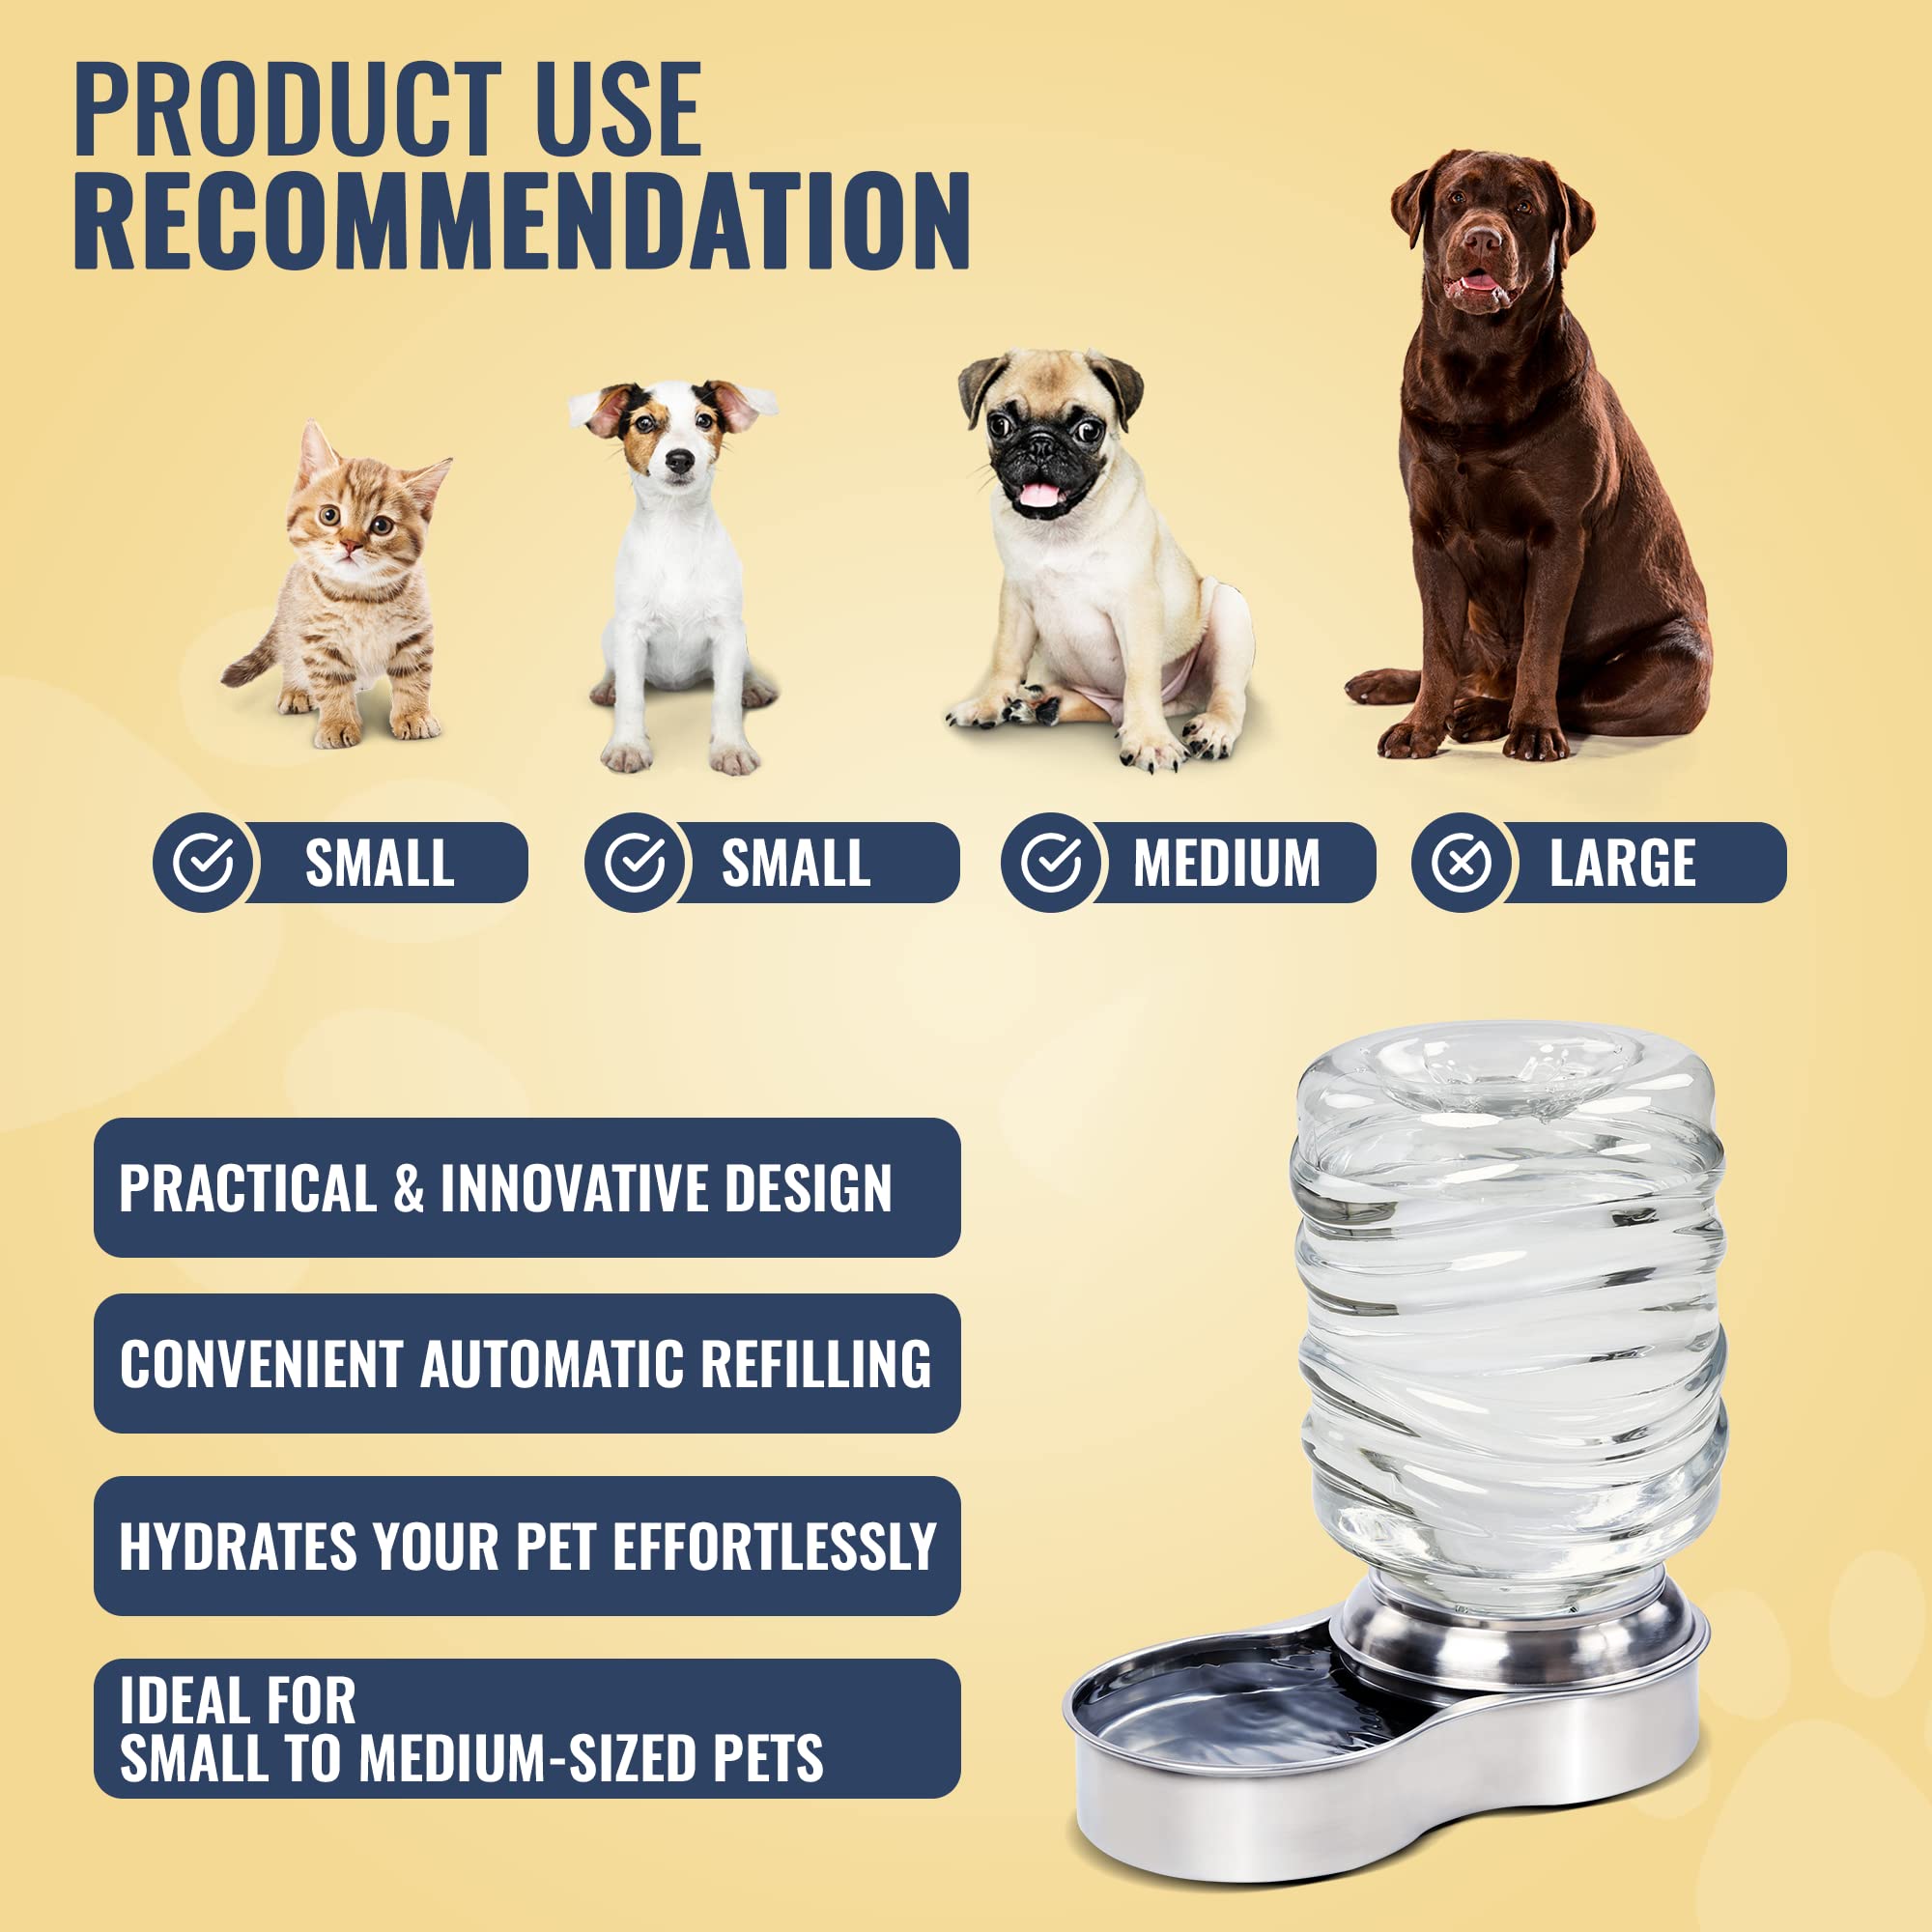 Bundaloo Dog Water Bowl Dispenser - Automatic Slow Refilling System Keeps Stainless Steel Drinking Dish Filled - Refillable 3 Liter Bottle, Non-Skid Feet - Clean, Safe, & Fresh Drink for Pet Dogs  - Good